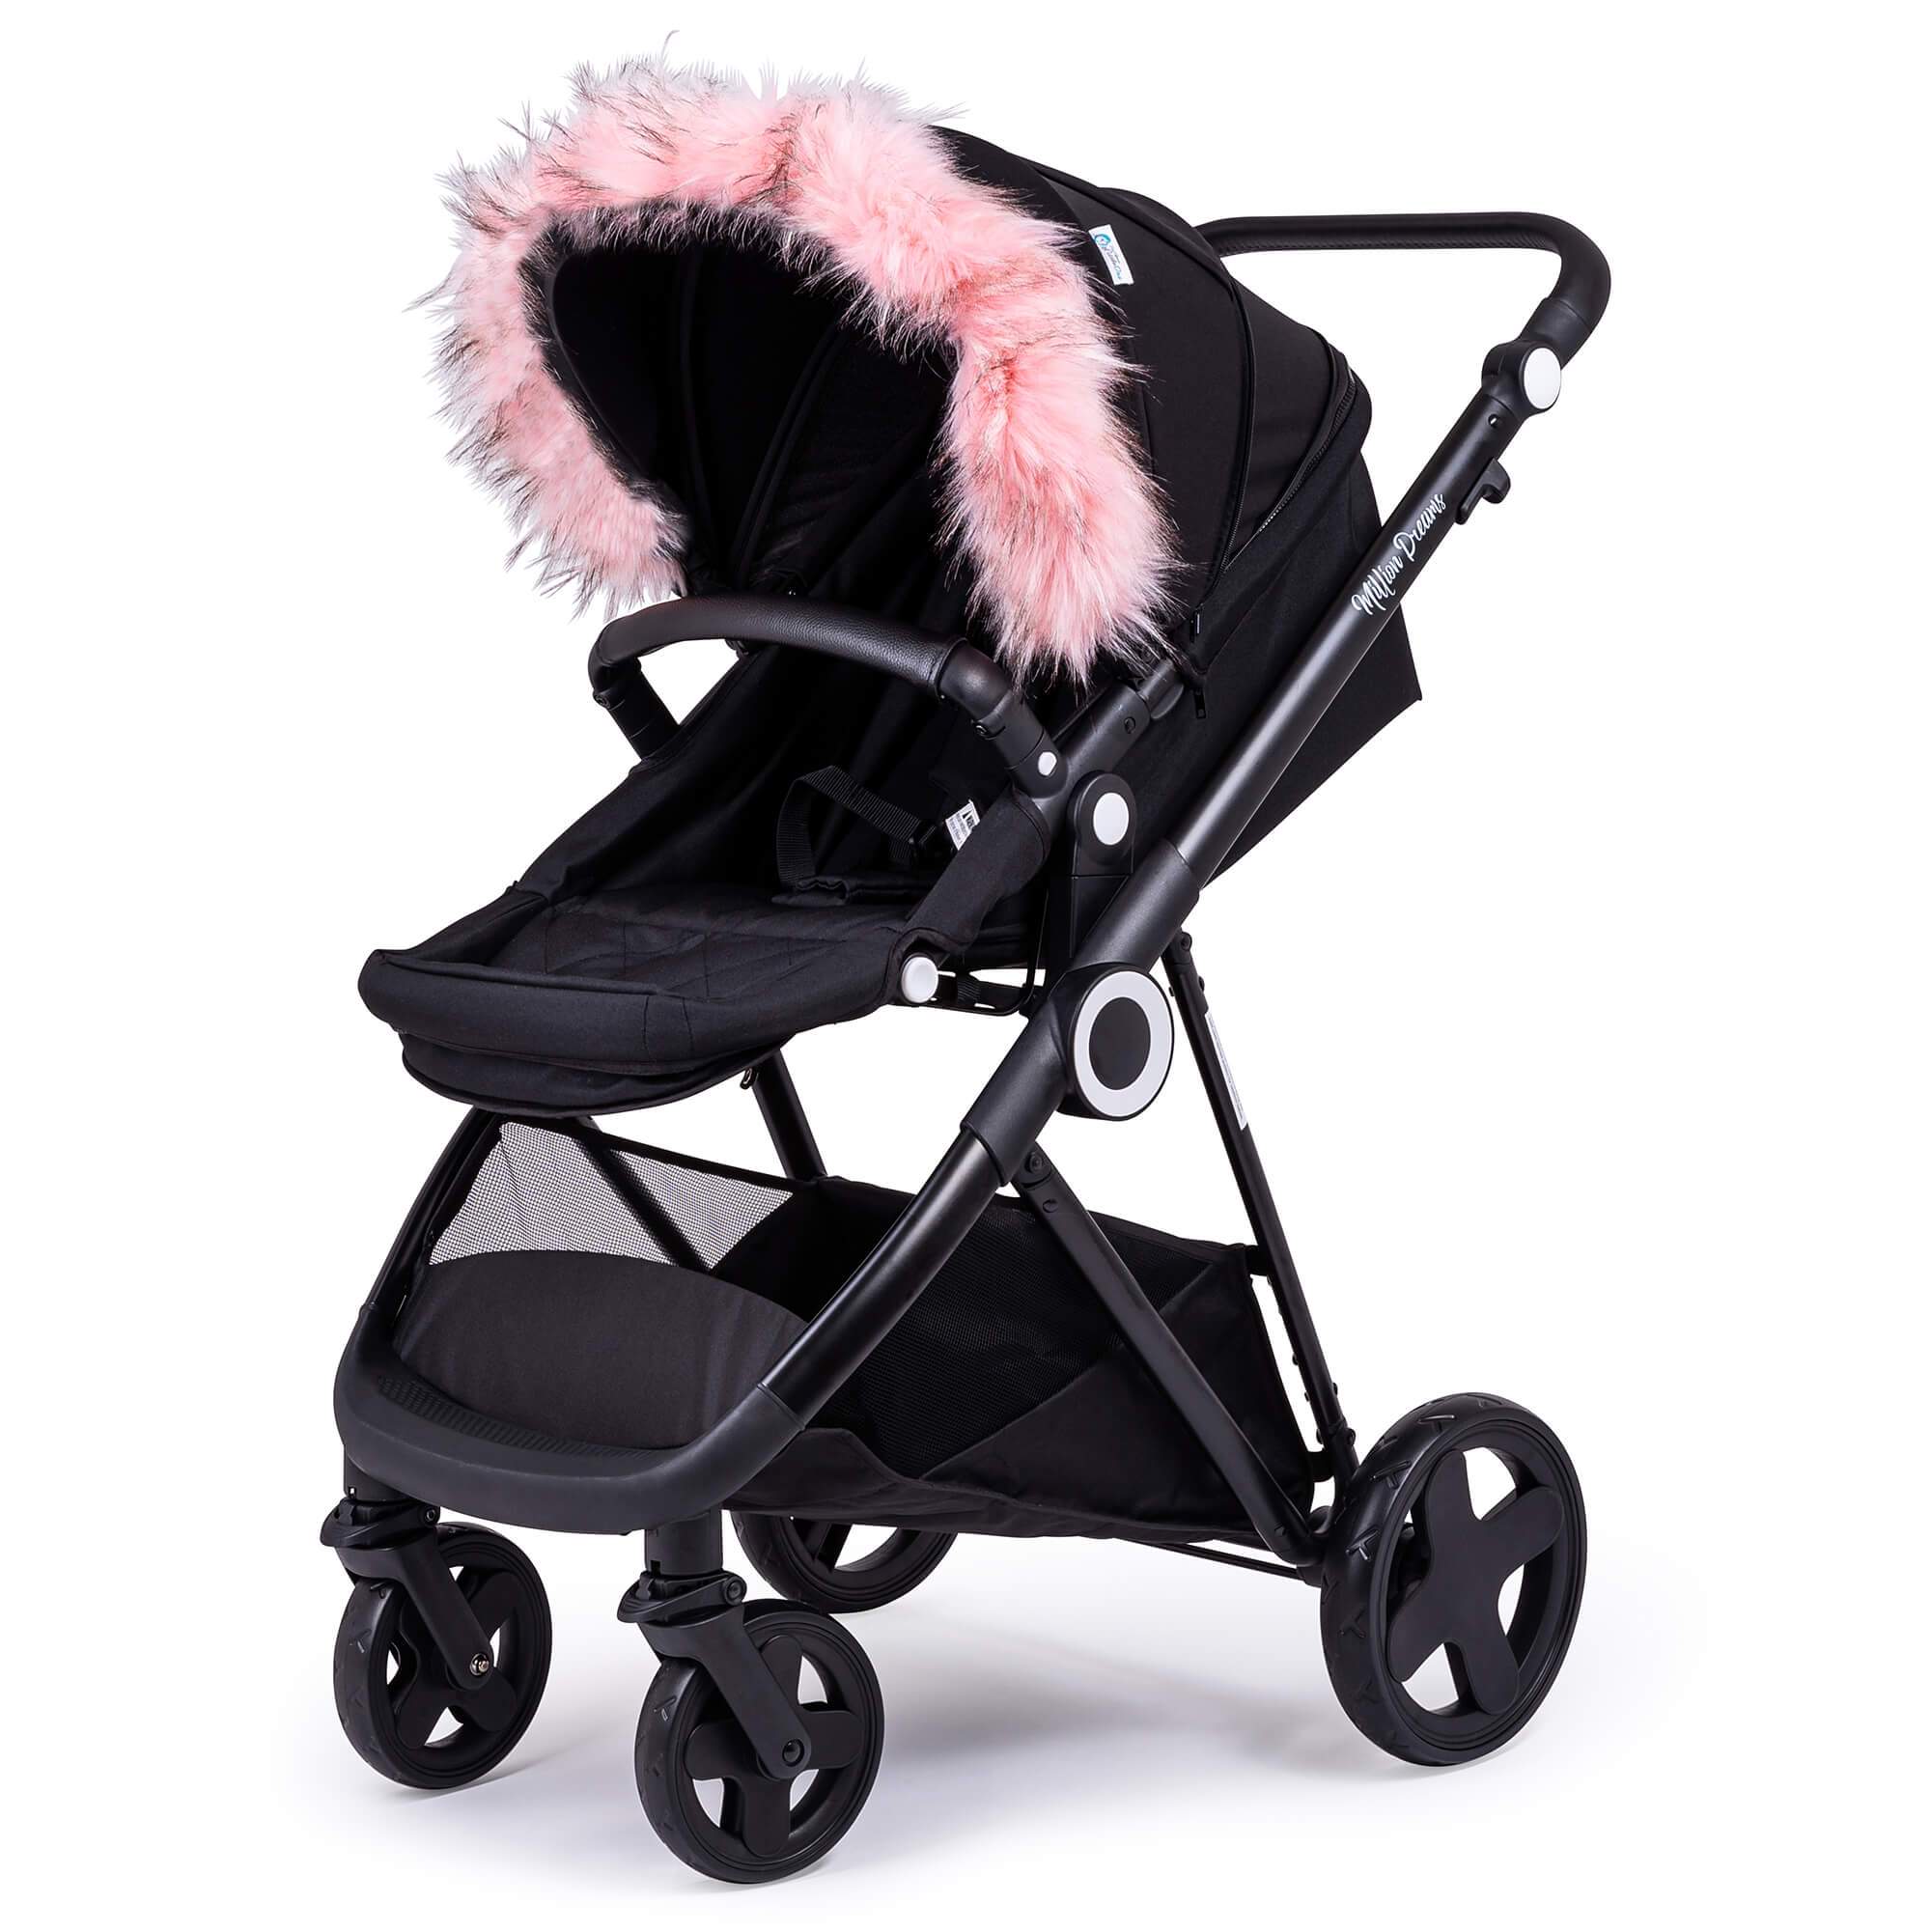 Pram Fur Hood Trim Attachment For Pushchair Compatible with Infababy - Light Pink / Fits All Models | For Your Little One